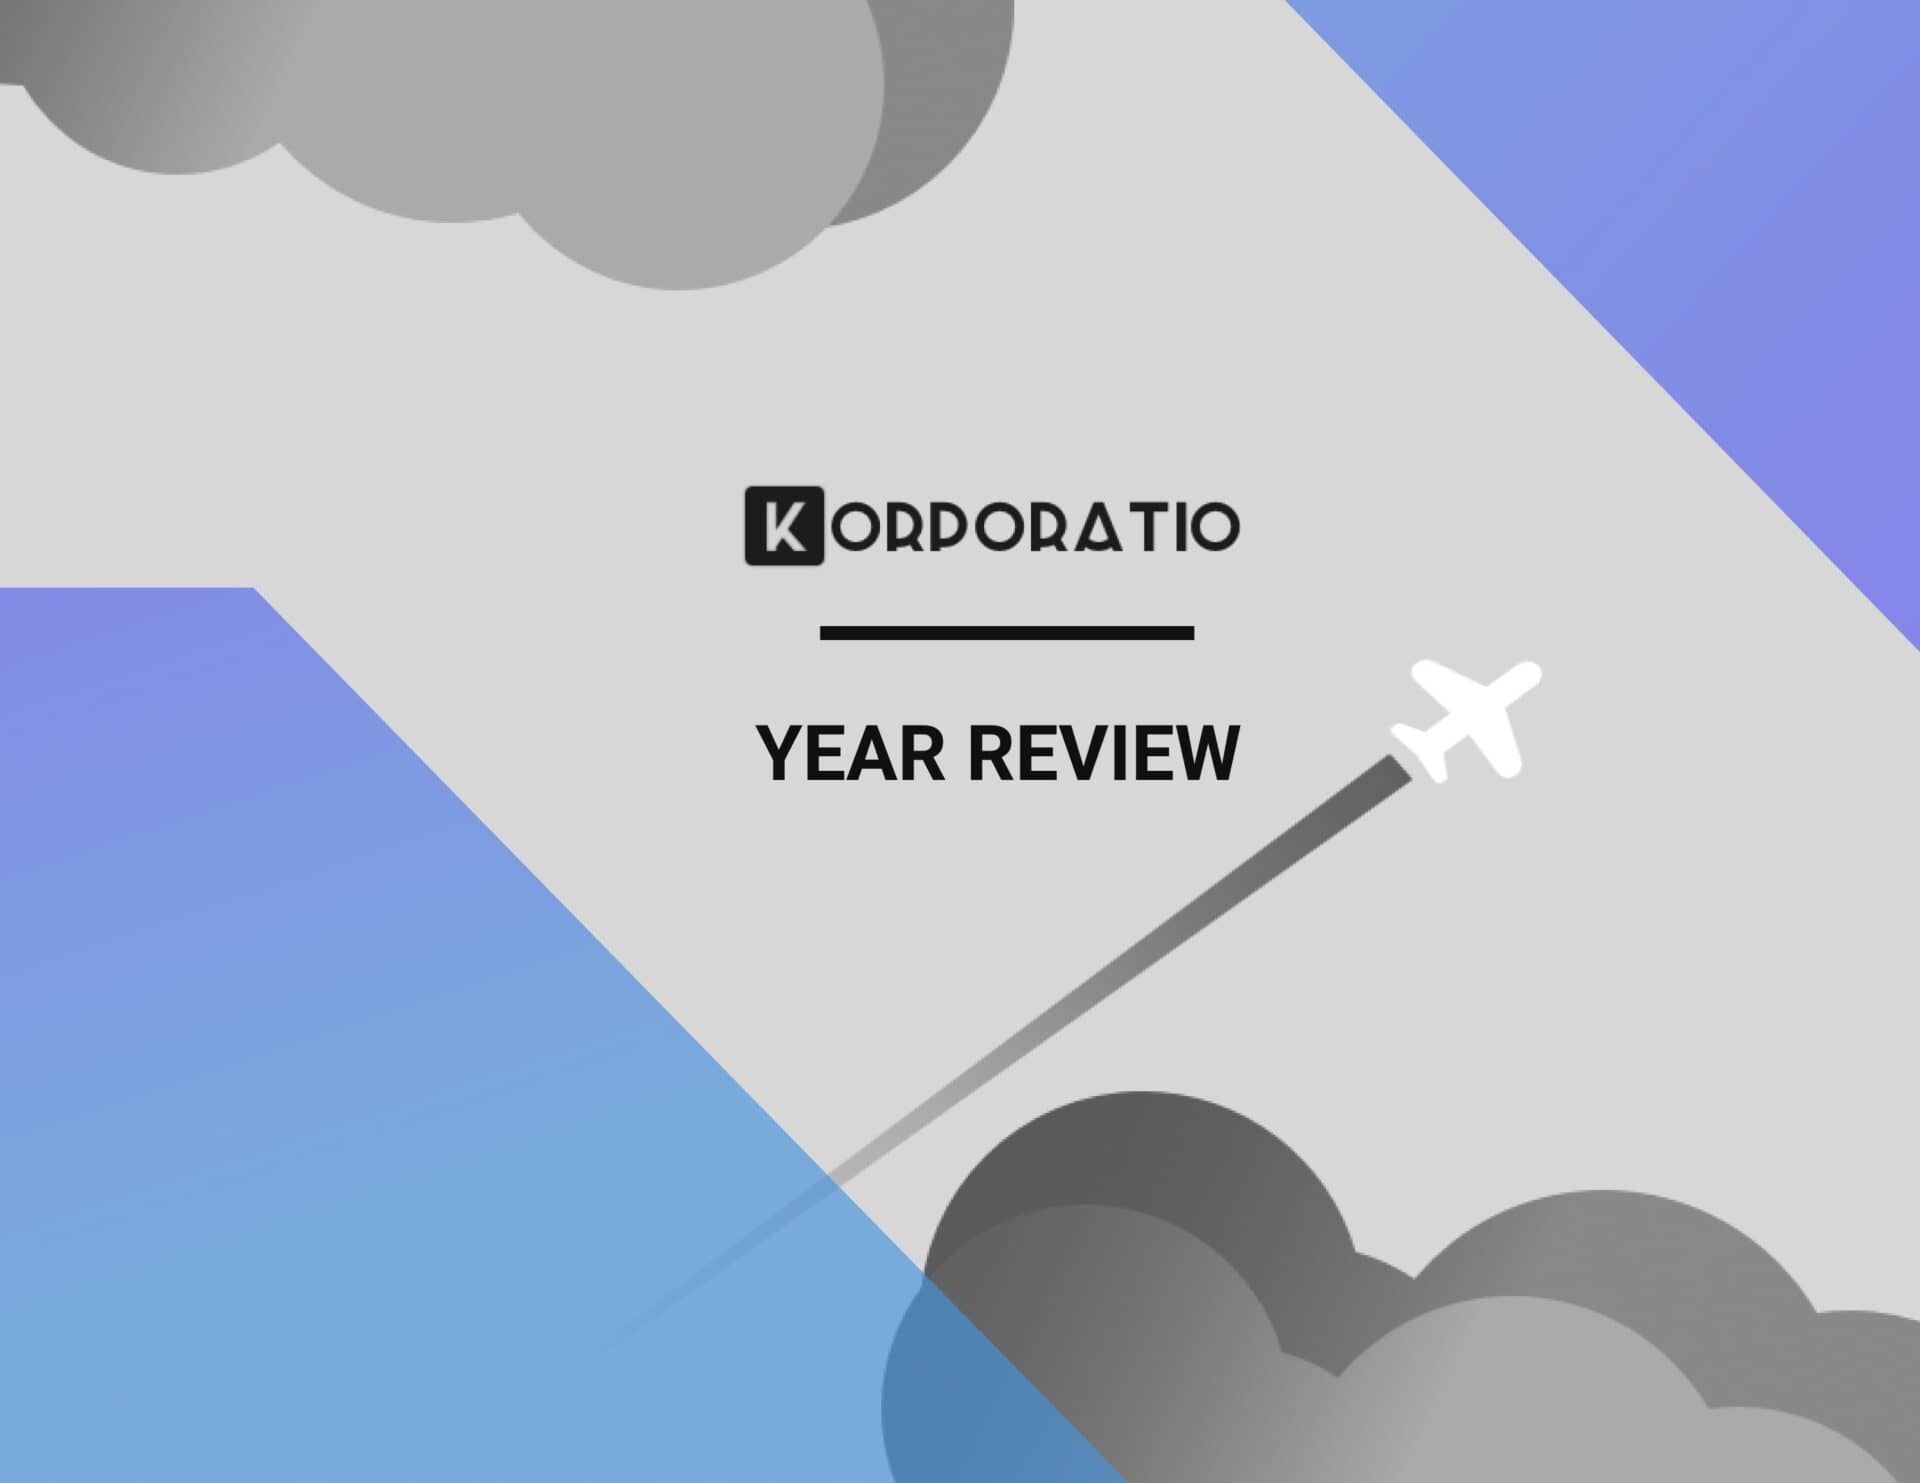 Year Review by Korporatio